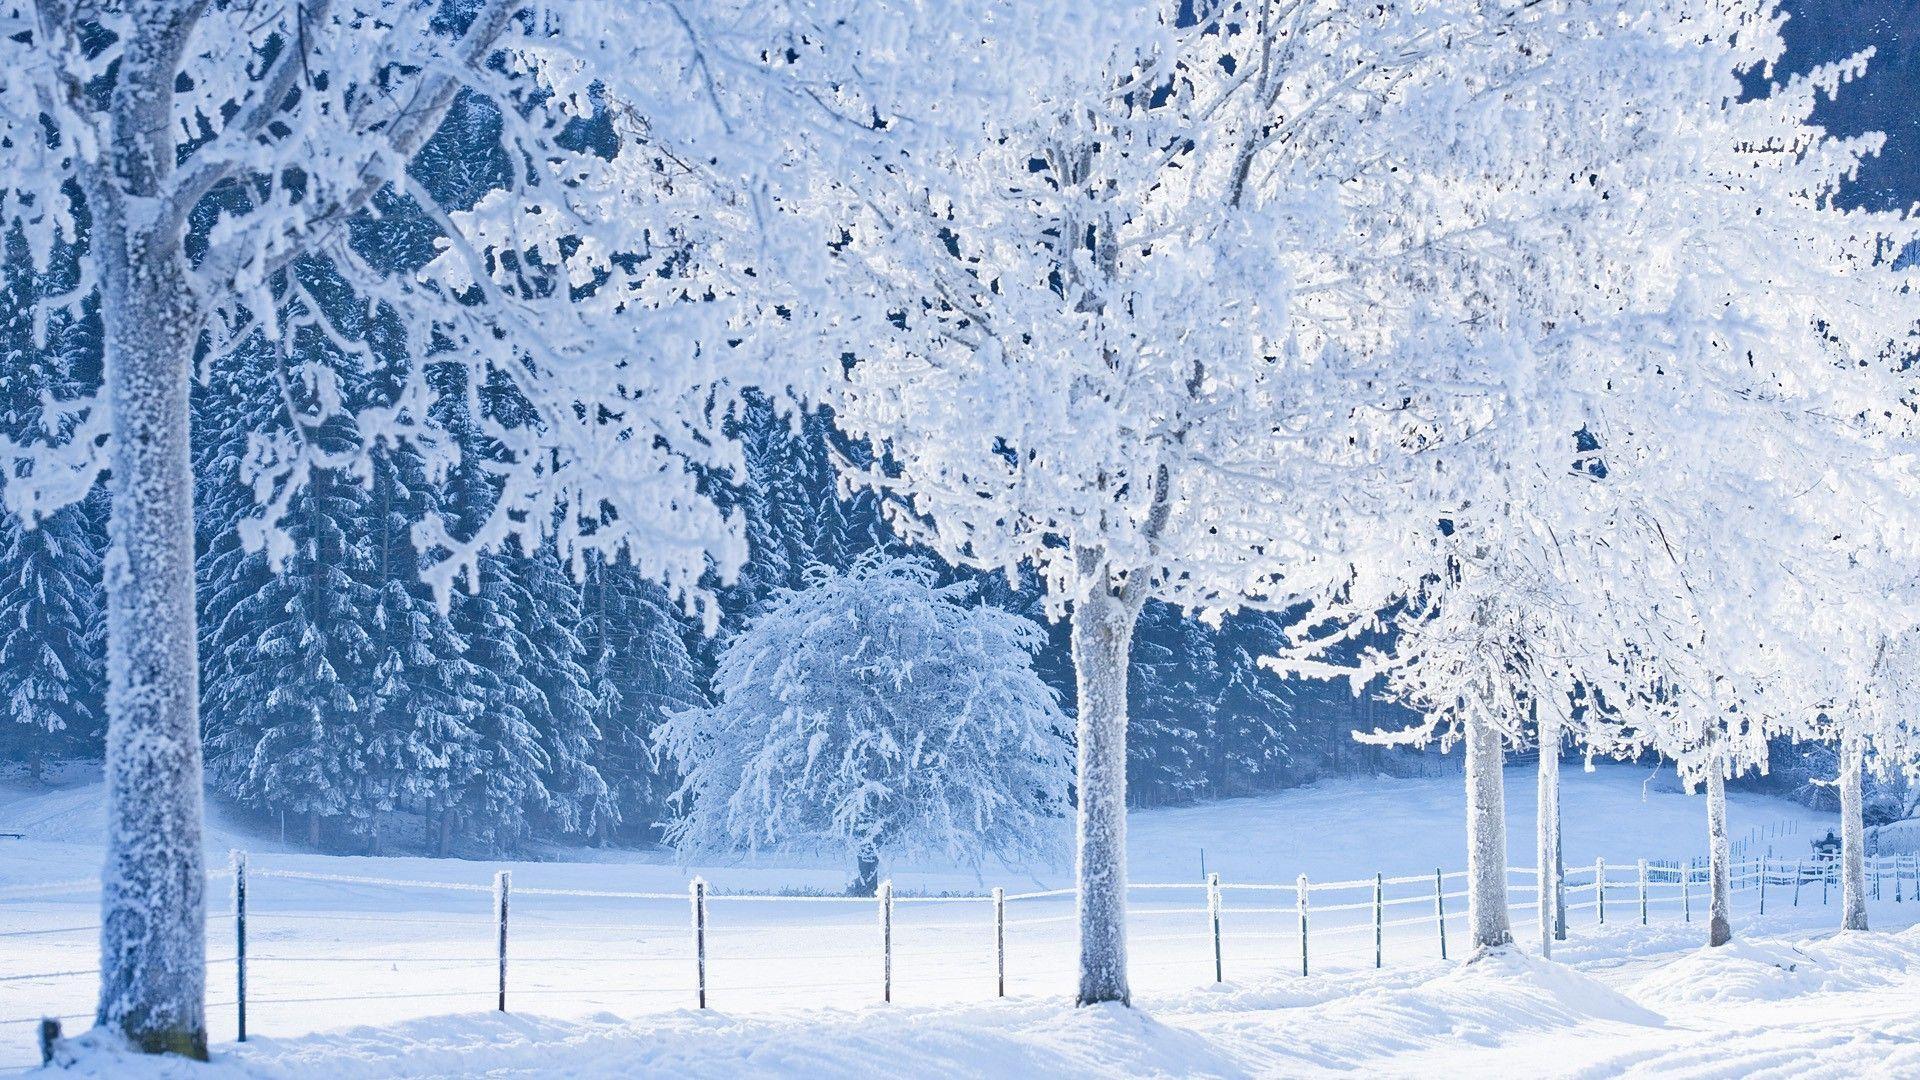 Wallpaper For > Snowy Tree Background